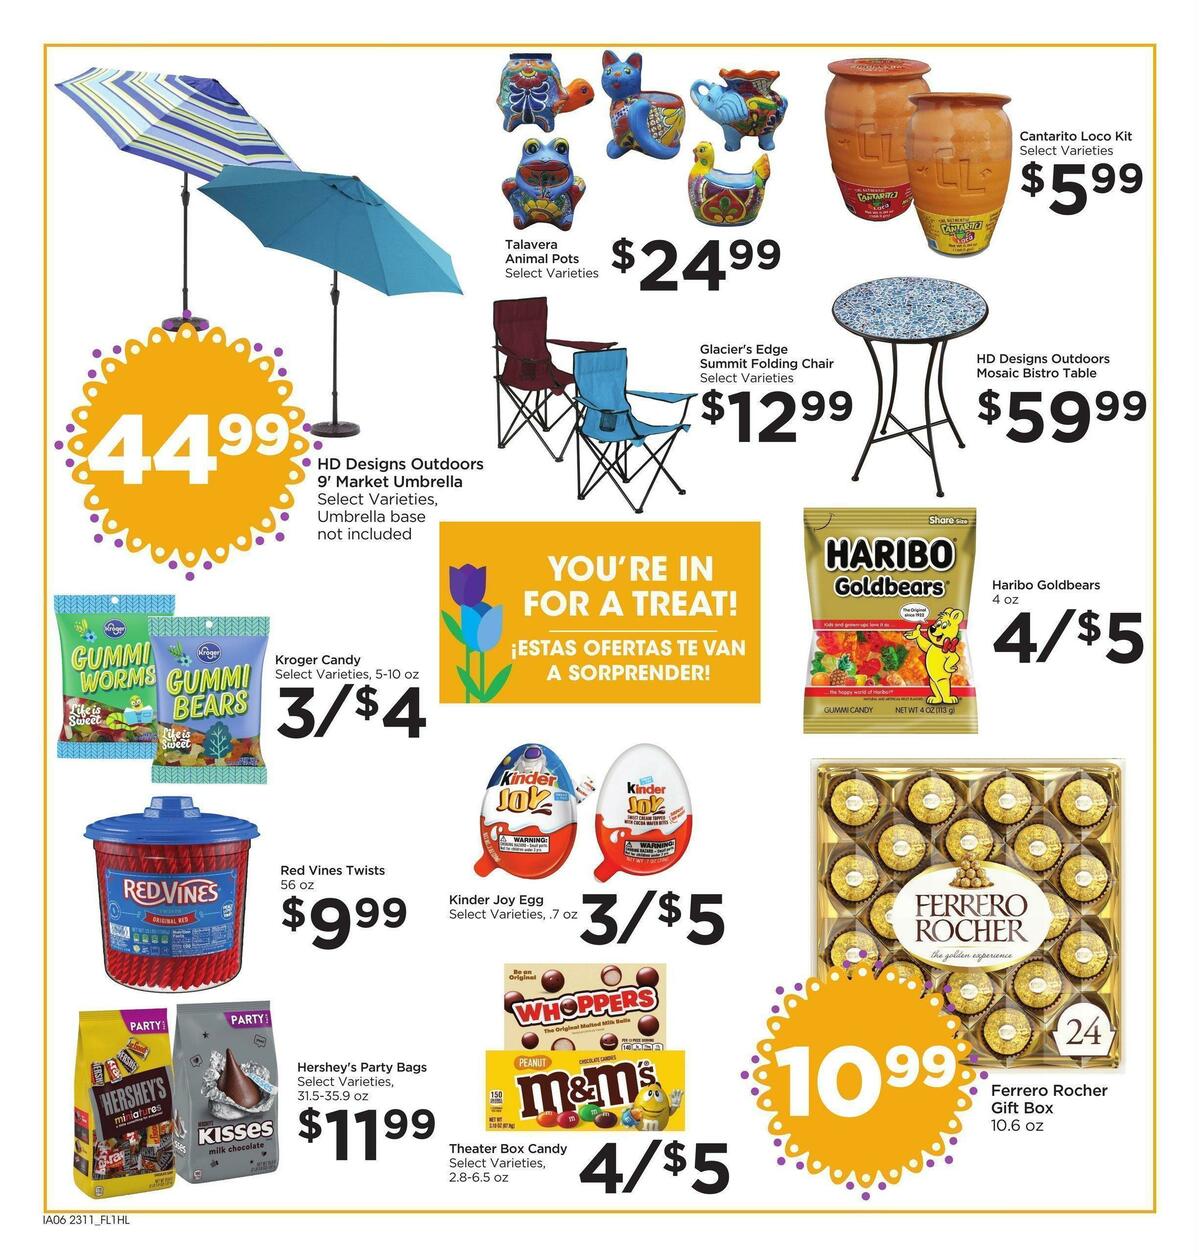 Food 4 Less Weekly Ad from April 12